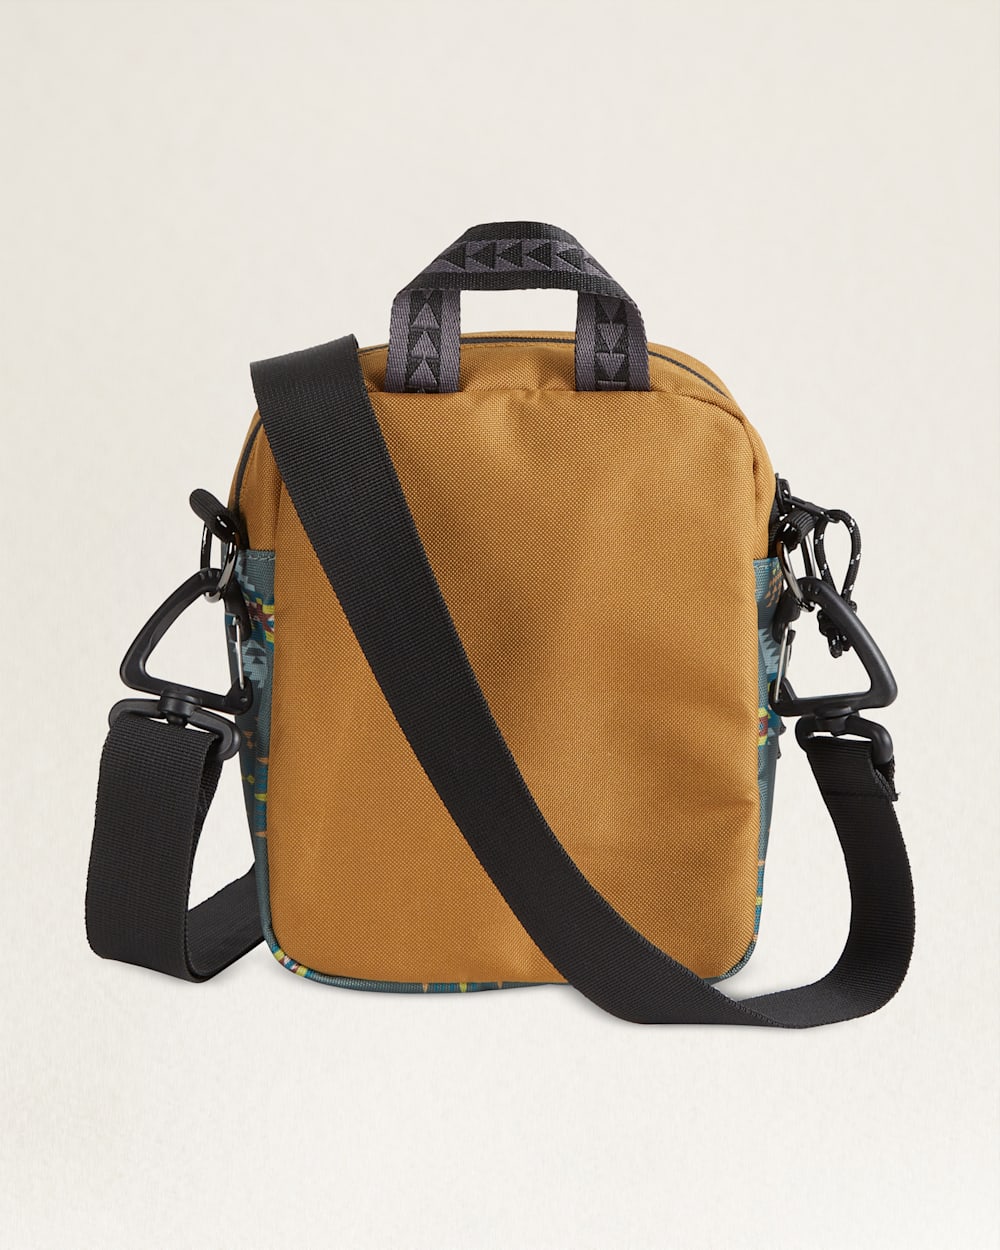 ALTERNATE VIEW OF RANCHO ARROYO EXPLORER CROSSBODY IN OLIVE image number 2